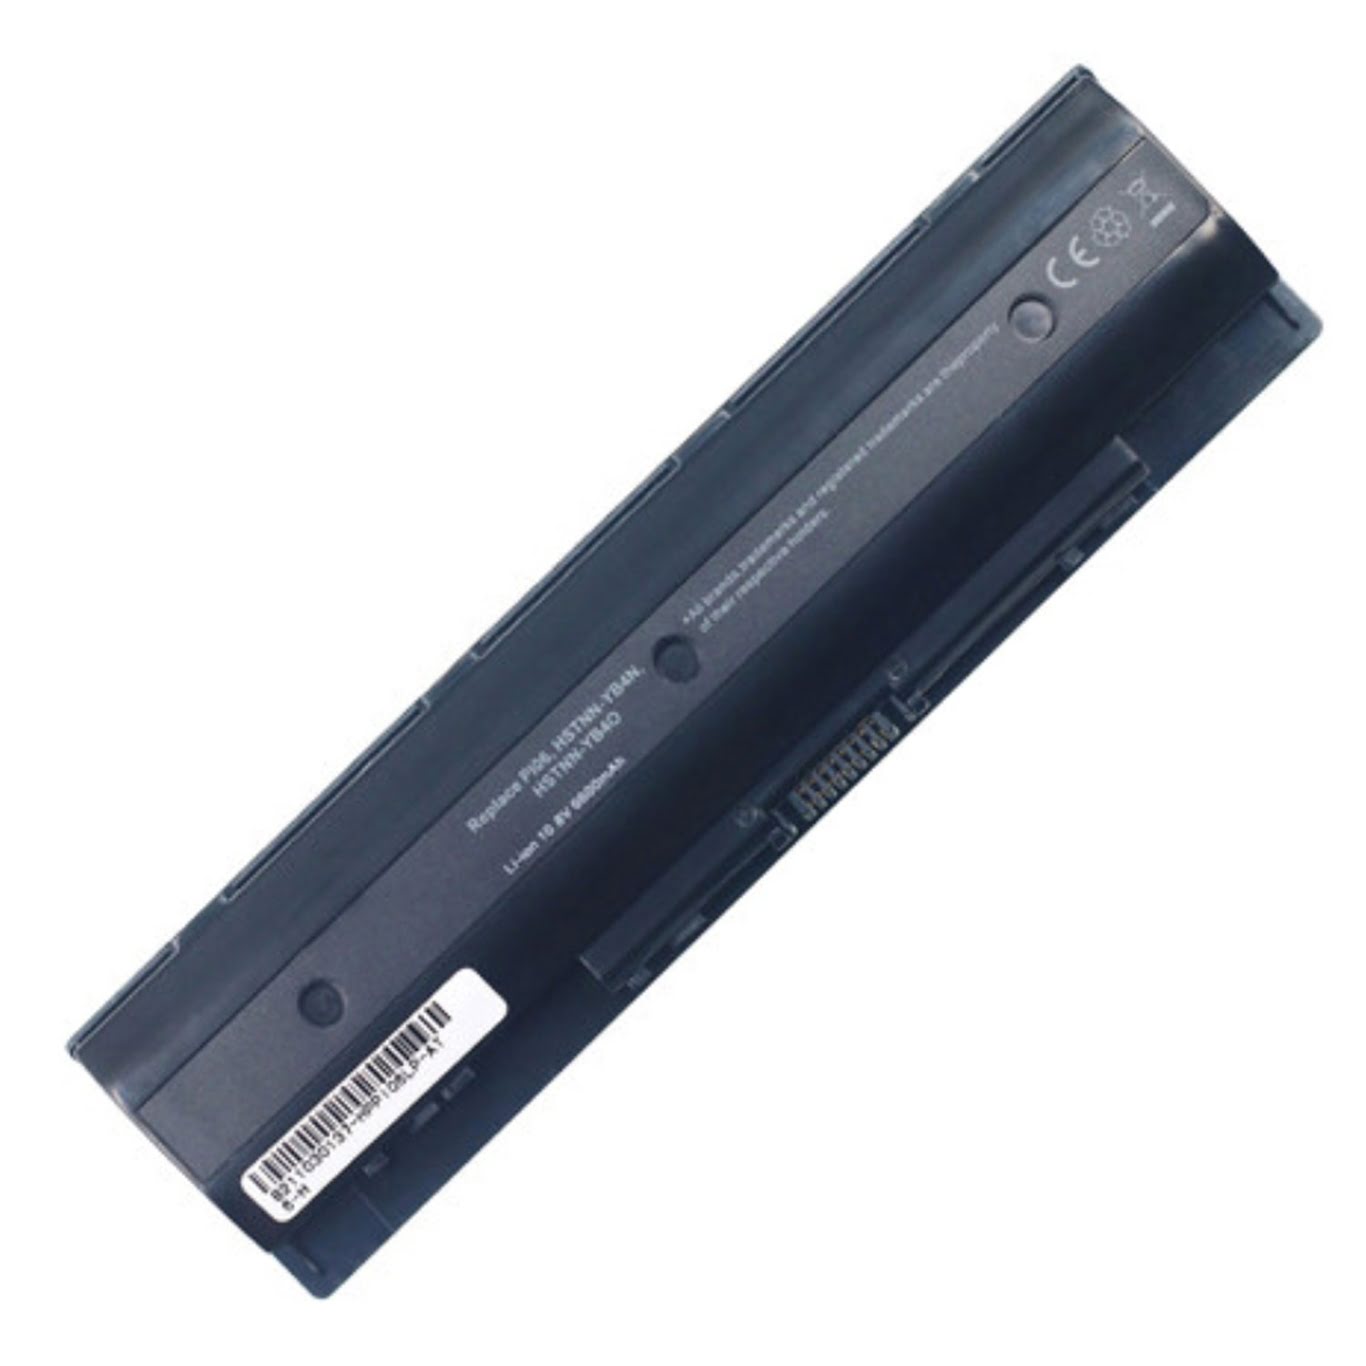 709988-421, 710416-001 replacement Laptop Battery for HP Envy 15 Series, Envy 15 Touch Series, 9 cells, 10.8V, 6600mAh